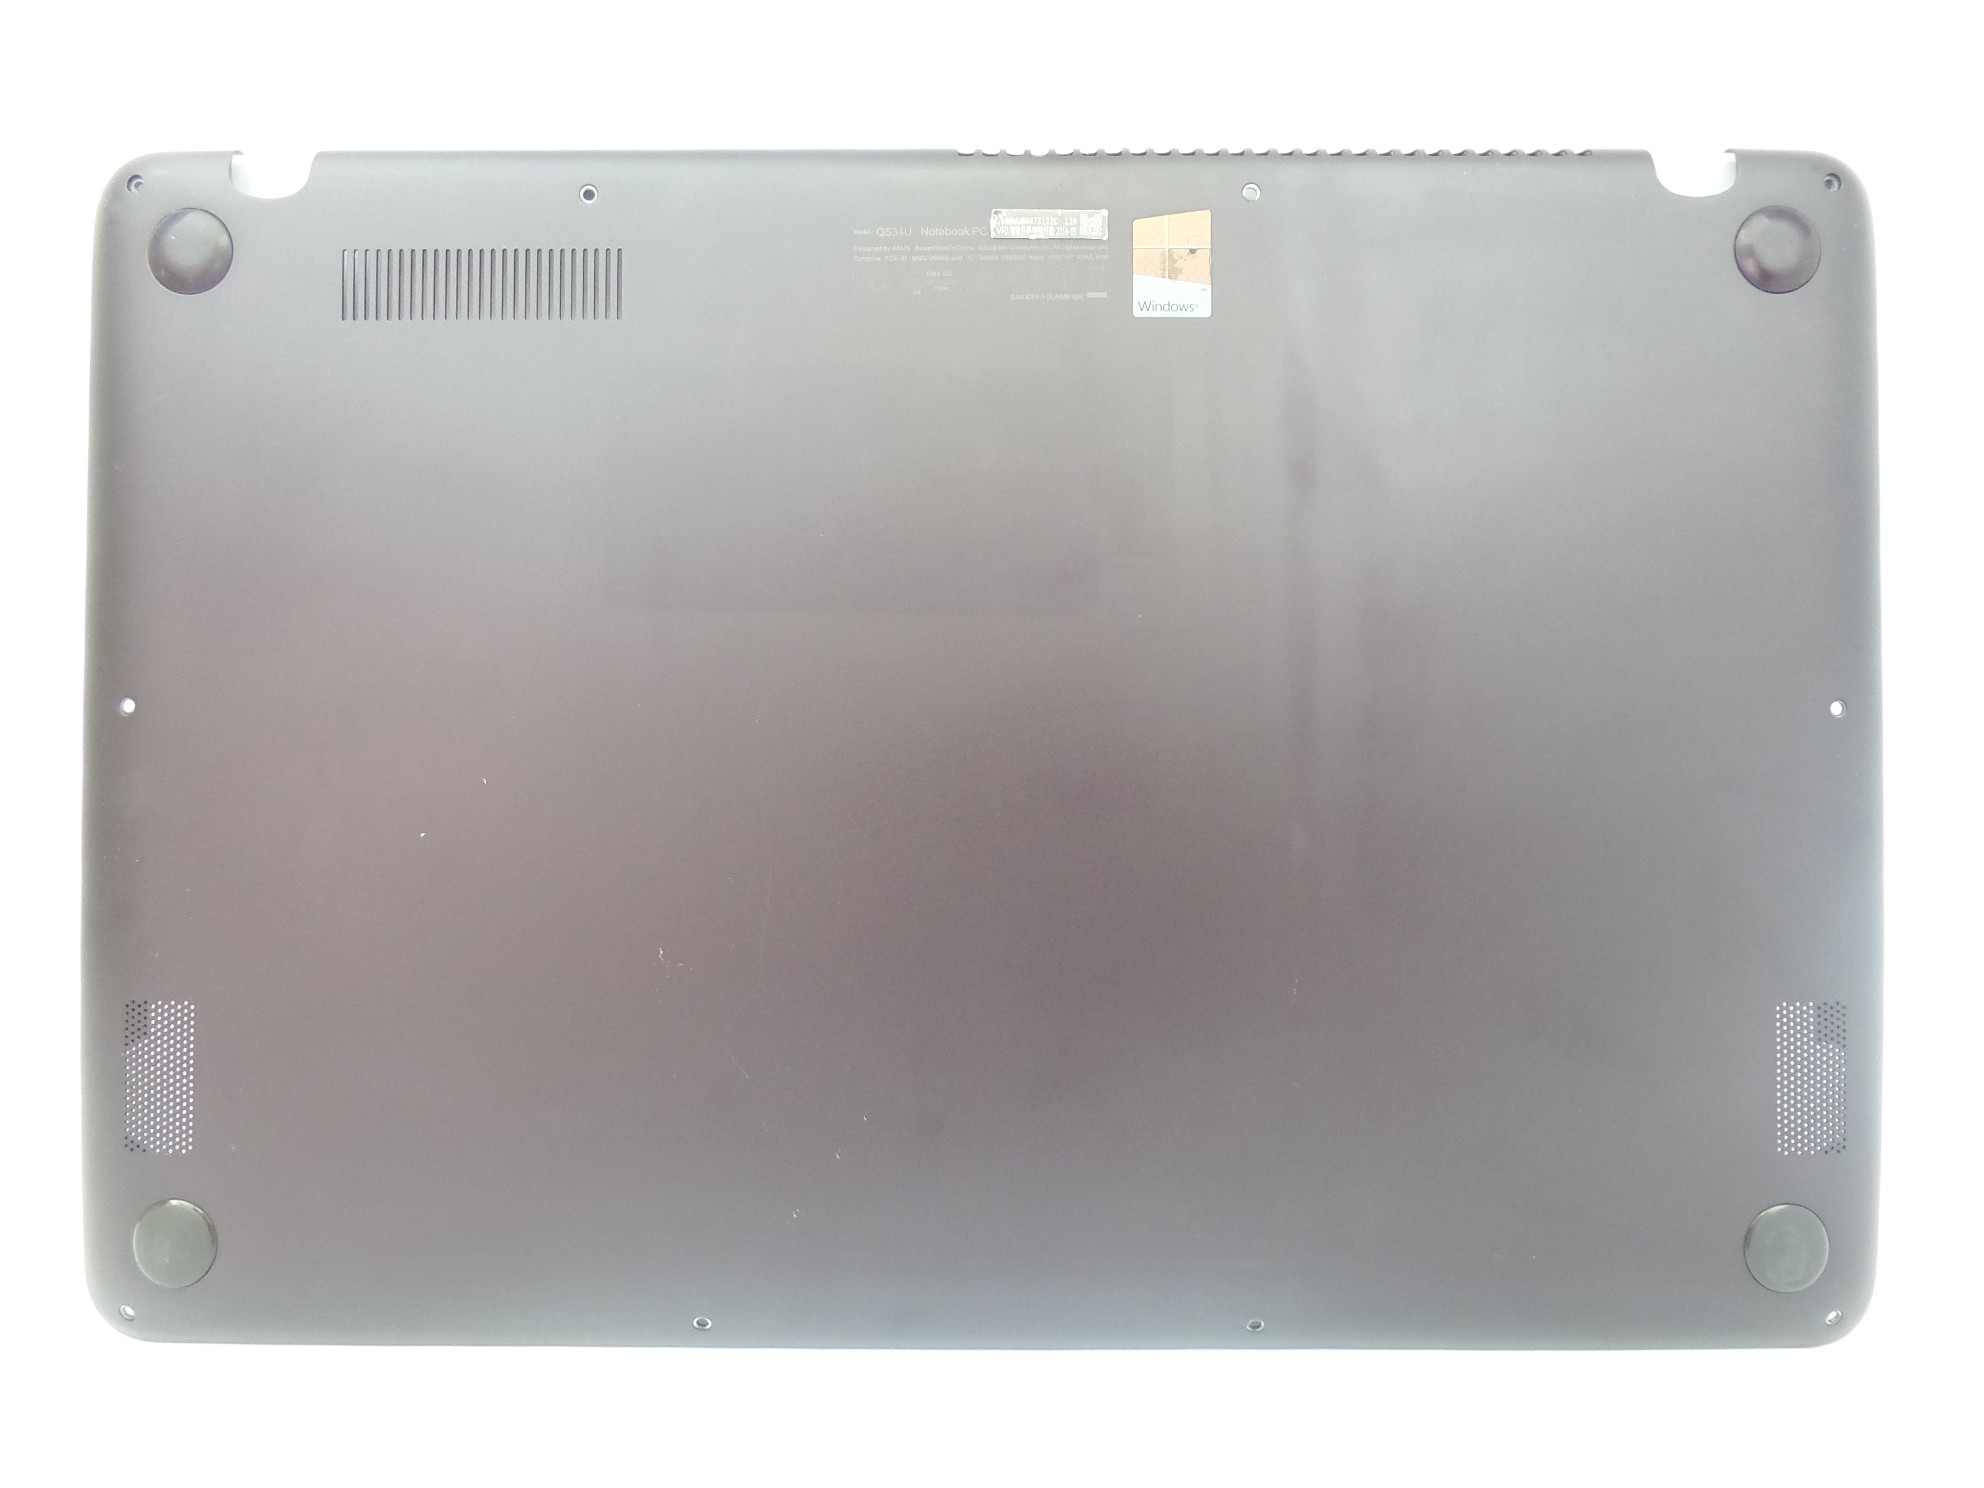 OEM Bottom Cover for Asus Q534UX-BB17T16 13NB0CE1AM0601